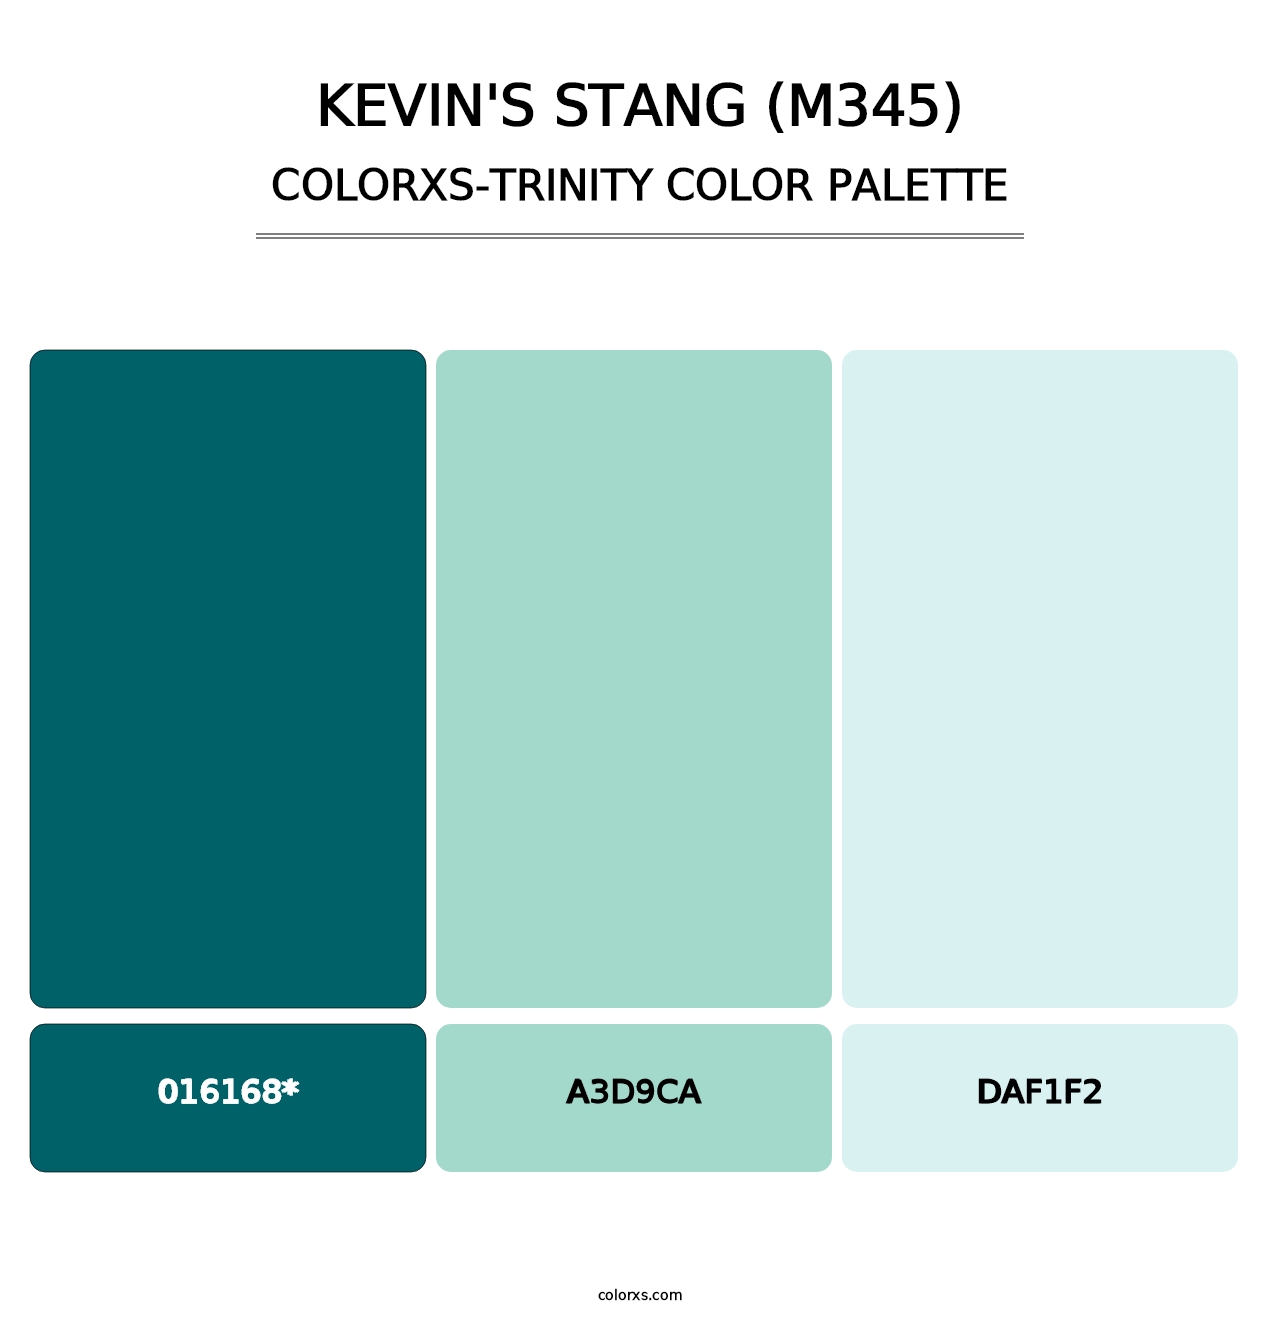 Kevin's Stang (M345) - Colorxs Trinity Palette